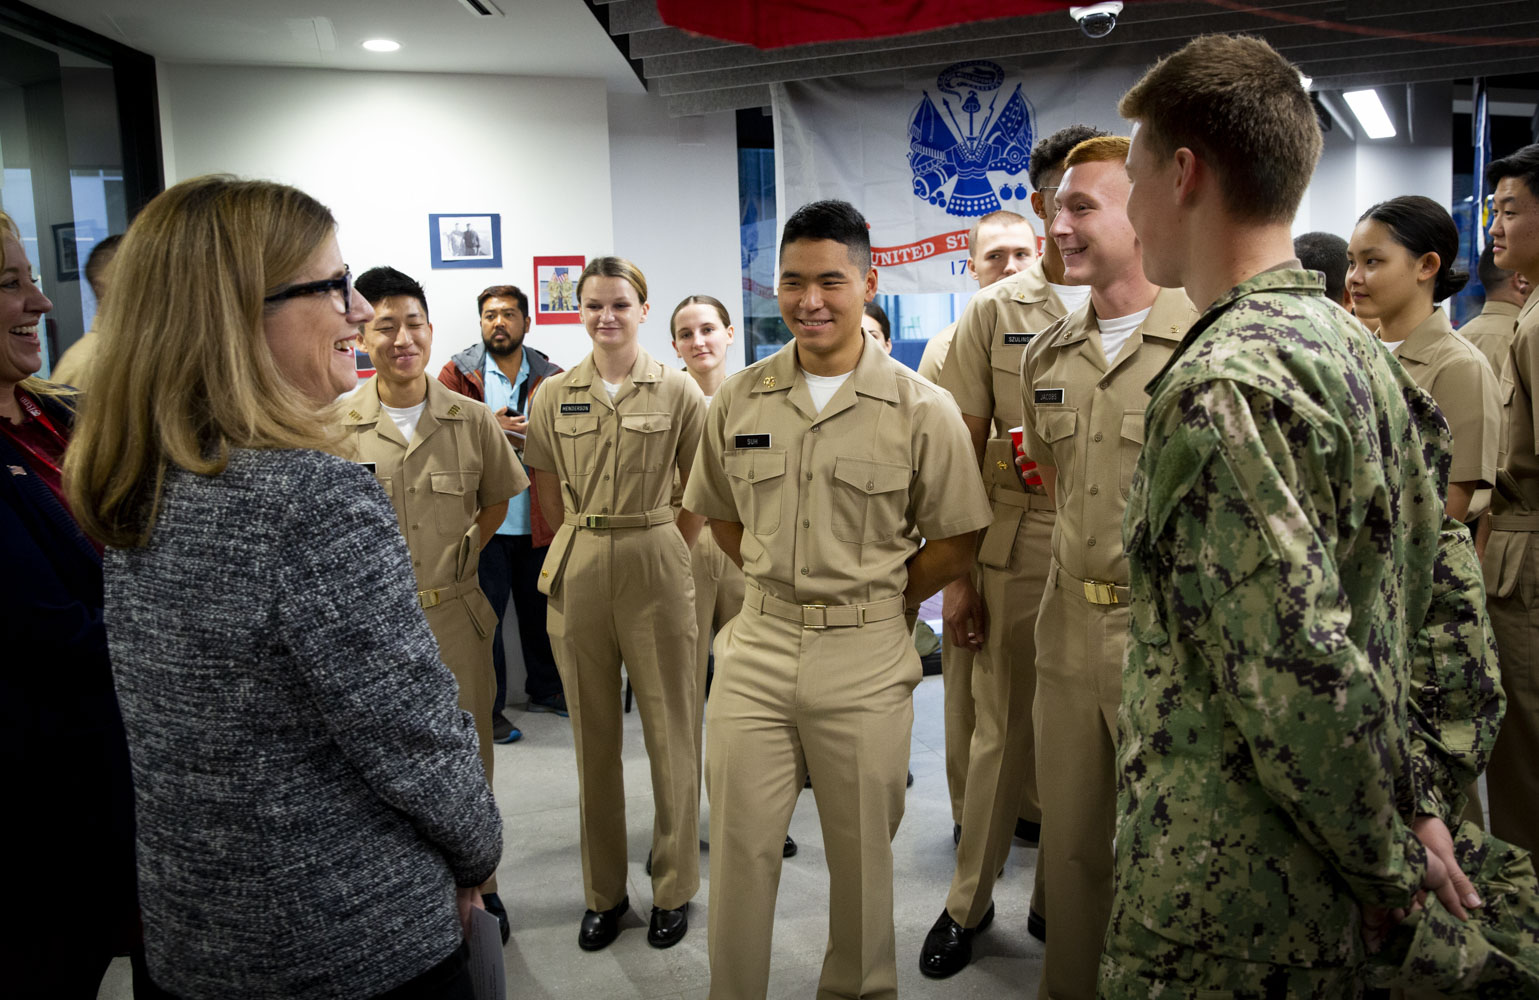 Liz Magill speaks with a roomful of ROTC members.